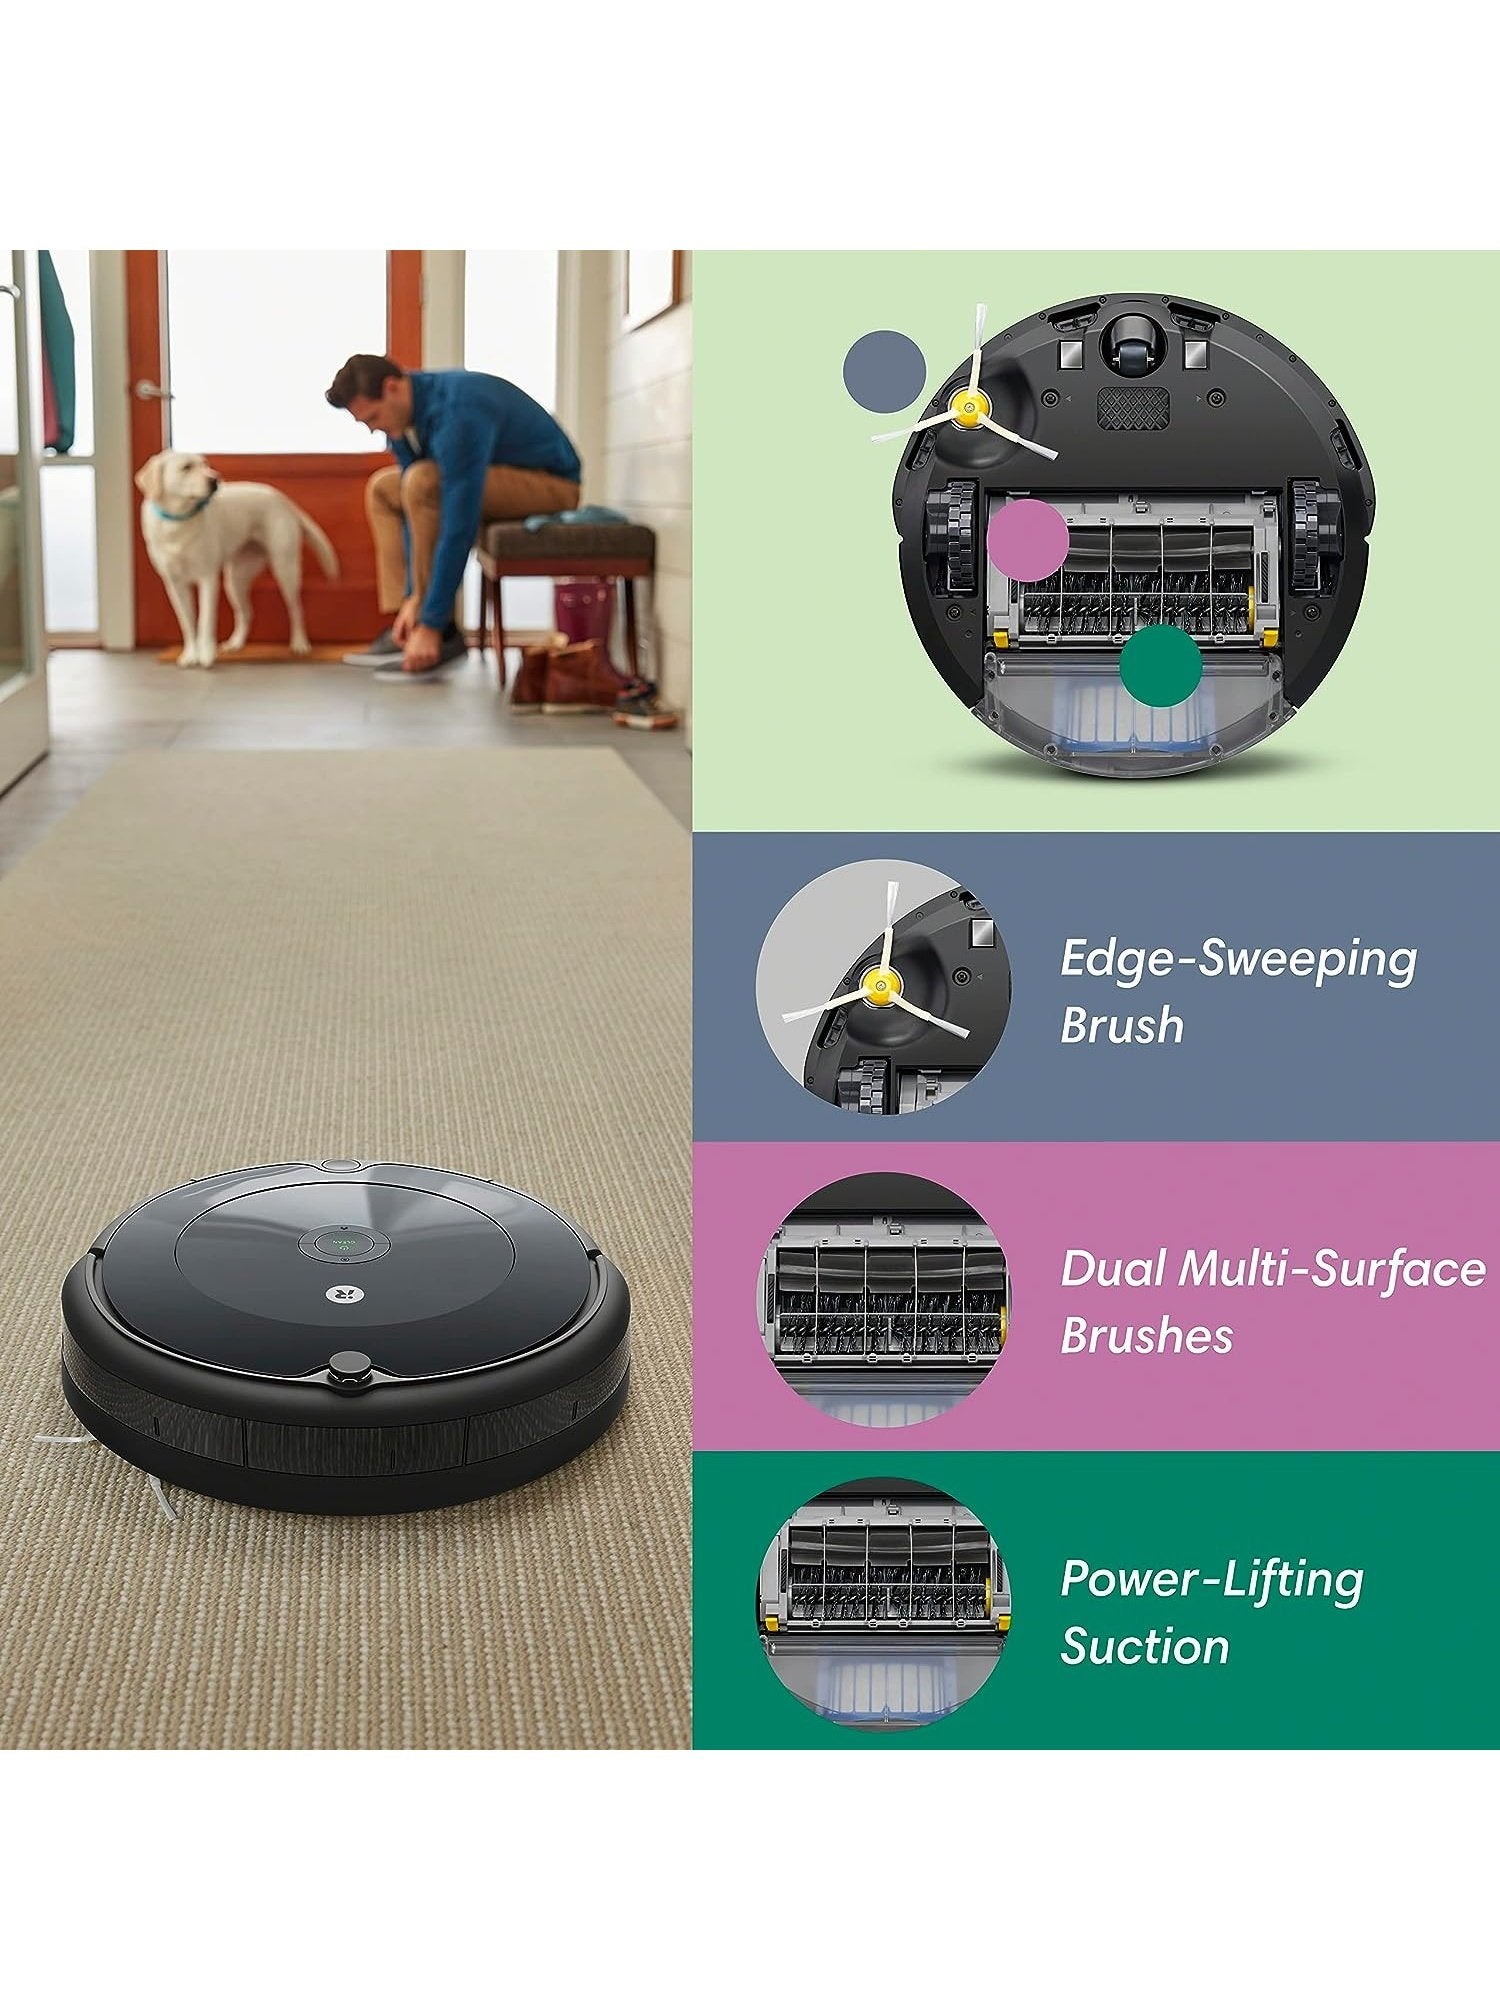 iRobot Roomba 694 Robot Vacuum-Wi-Fi Connectivity, Personalized Cleaning Recommendations, Works with Alexa, Good for Pet Hair, Carpets, Hard Floors, Self-Charging